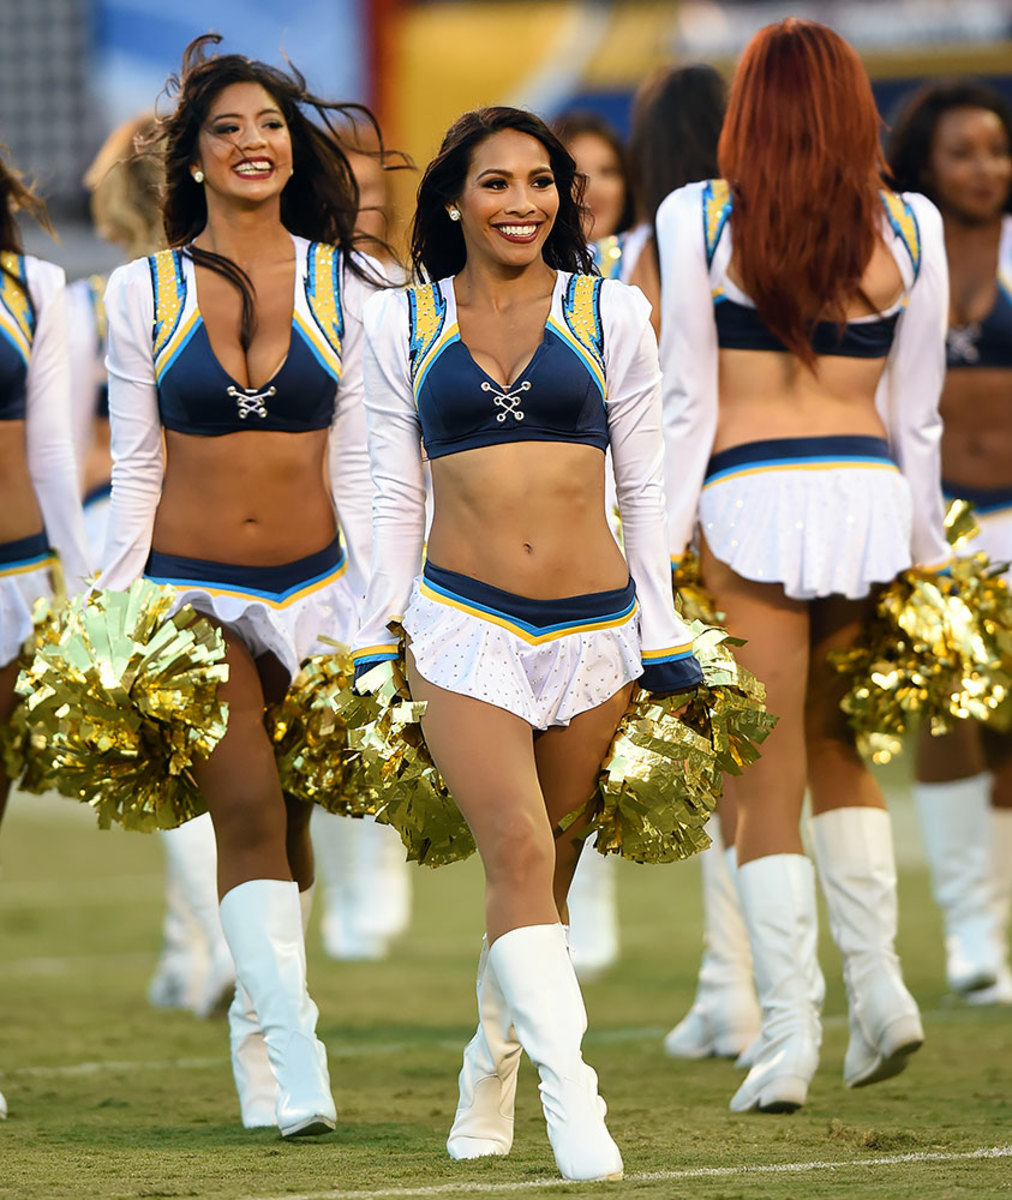 San-Diego-Chargers-cheerleaders-0071608196565_Cardinals_at_Chargers.jpg